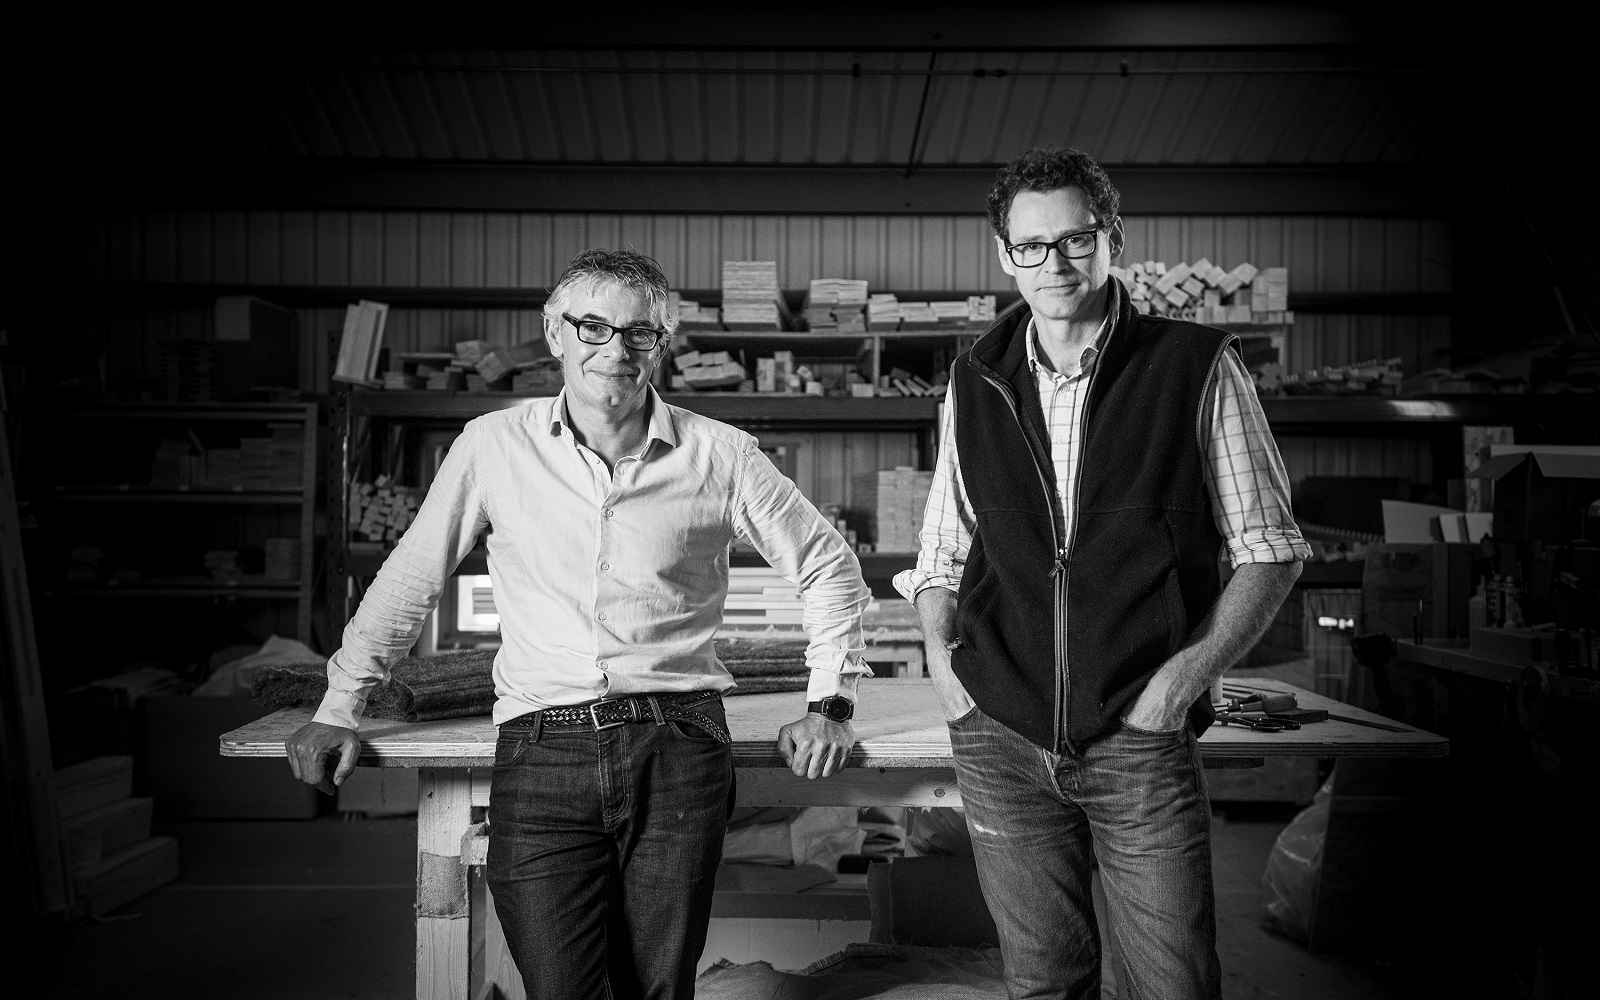 Naturalmat founders Mark Tremlett (l) and Peter Tindall (r) in the company’s Devon workshop.